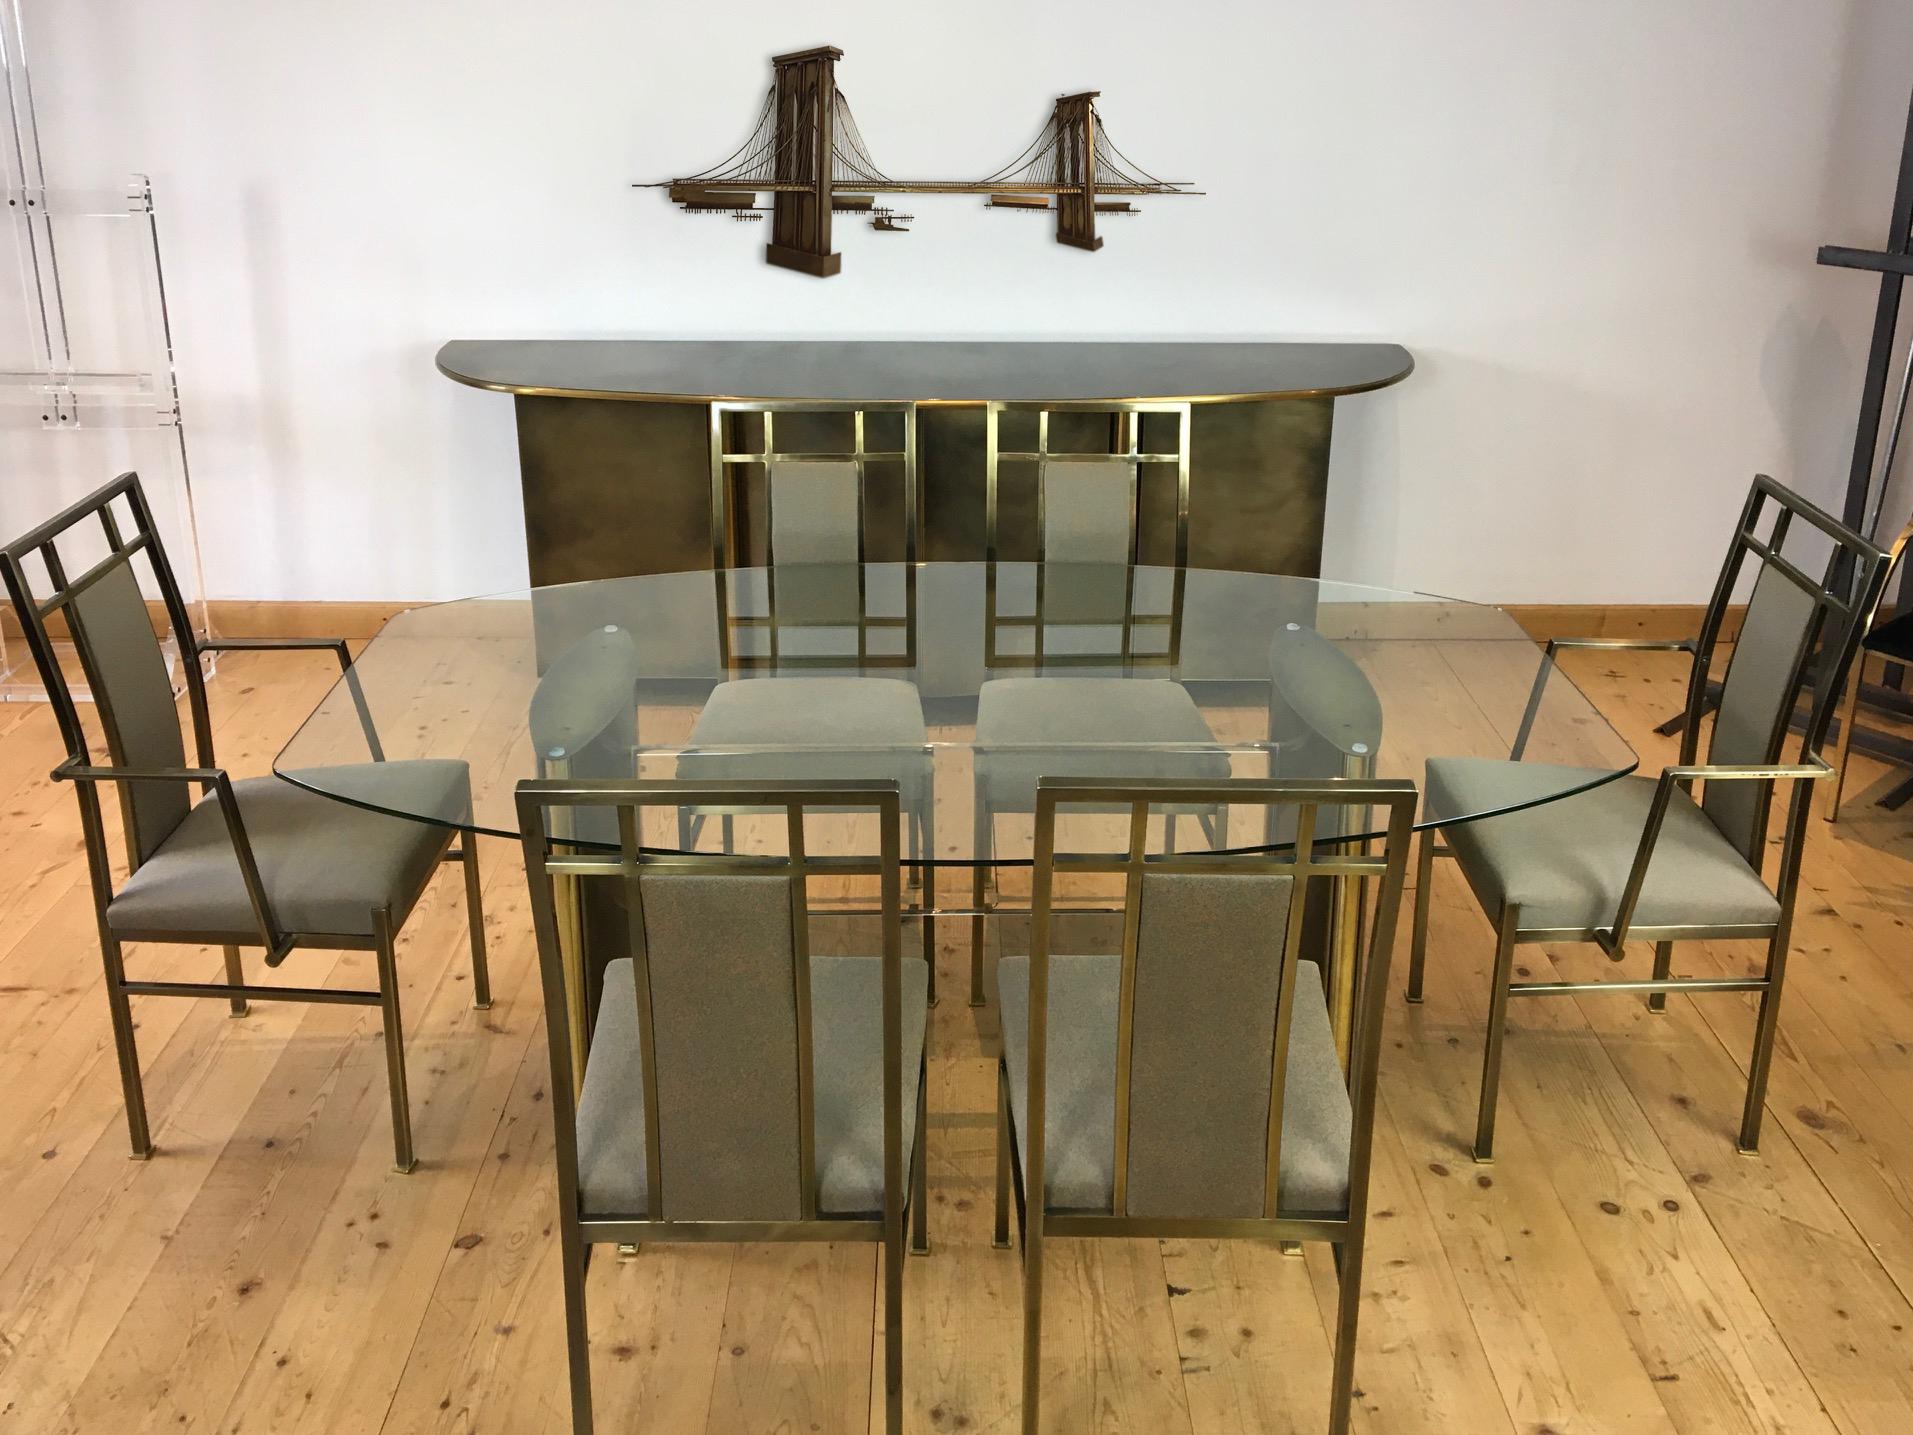 Belgo Chrome dining room set consisting of a dining room table with 6 chairs. 
This stylish Hollywood Regency set has a dining room table with 2 bronze patinated steel legs which are connected by a lucite intermediate piece and a thick glass top.